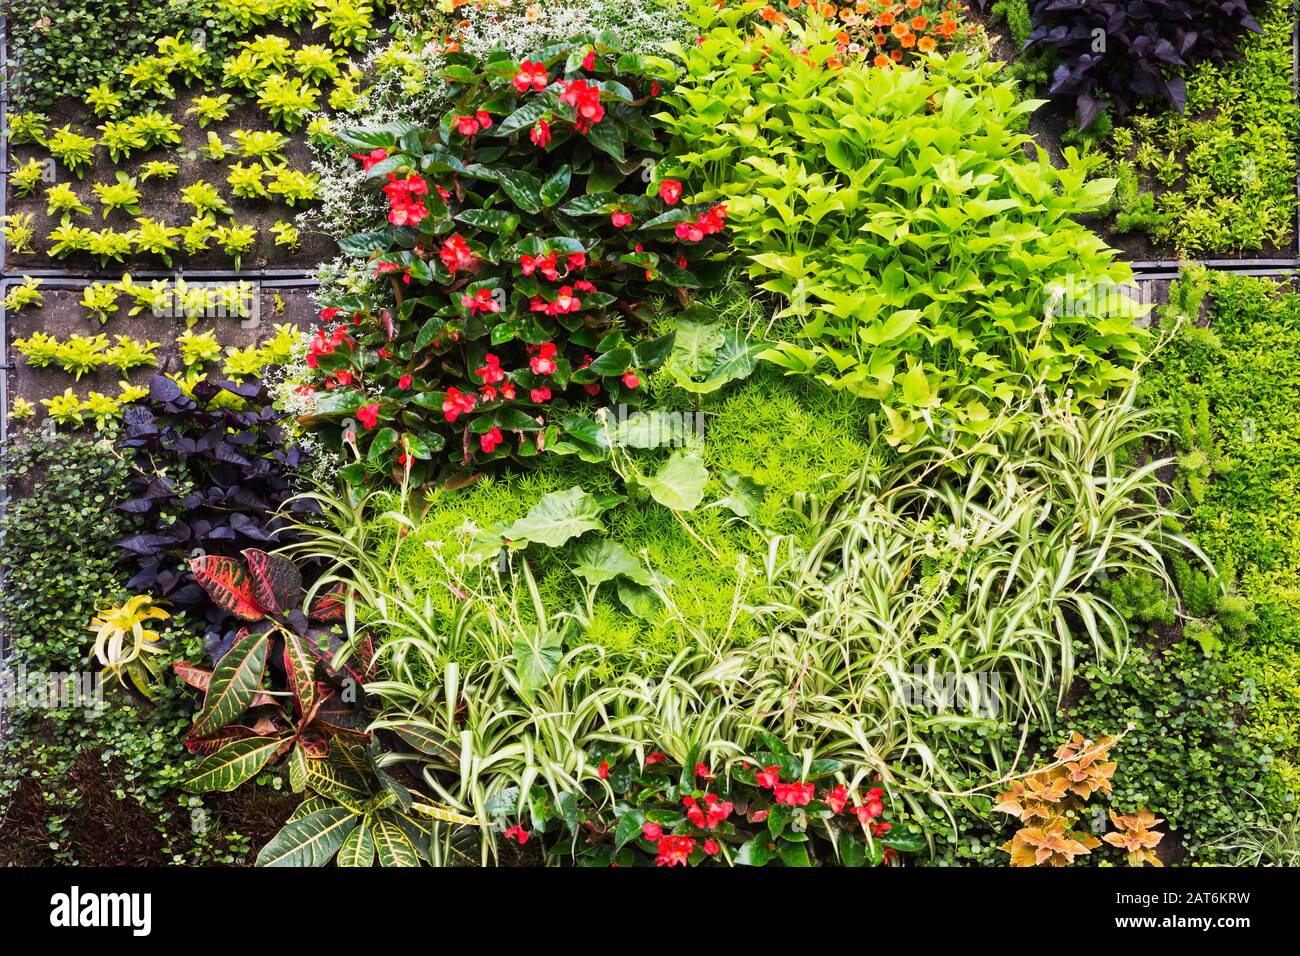 Live plants and flowers design with Codiaeum variegatum - Croton,  Solenostemon - Coleus, perennial grass, red Begonias in upright trays Stock Photo